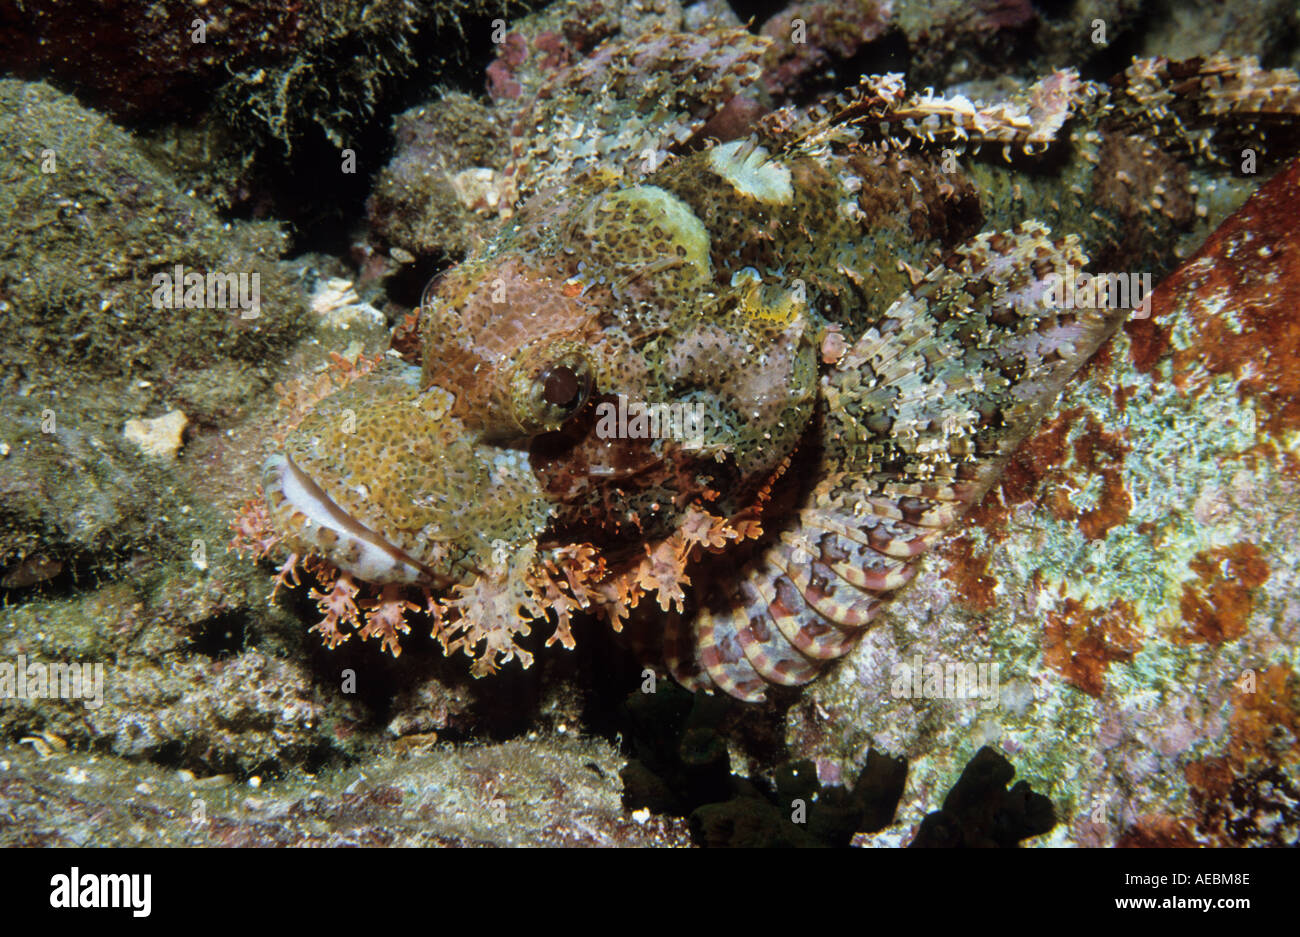 Tasselled Scorpionfish Scorpaenopsis oxycephalus changes colour to blend in with the background Sanganeb Reef Sudan Red Sea Indi Stock Photo